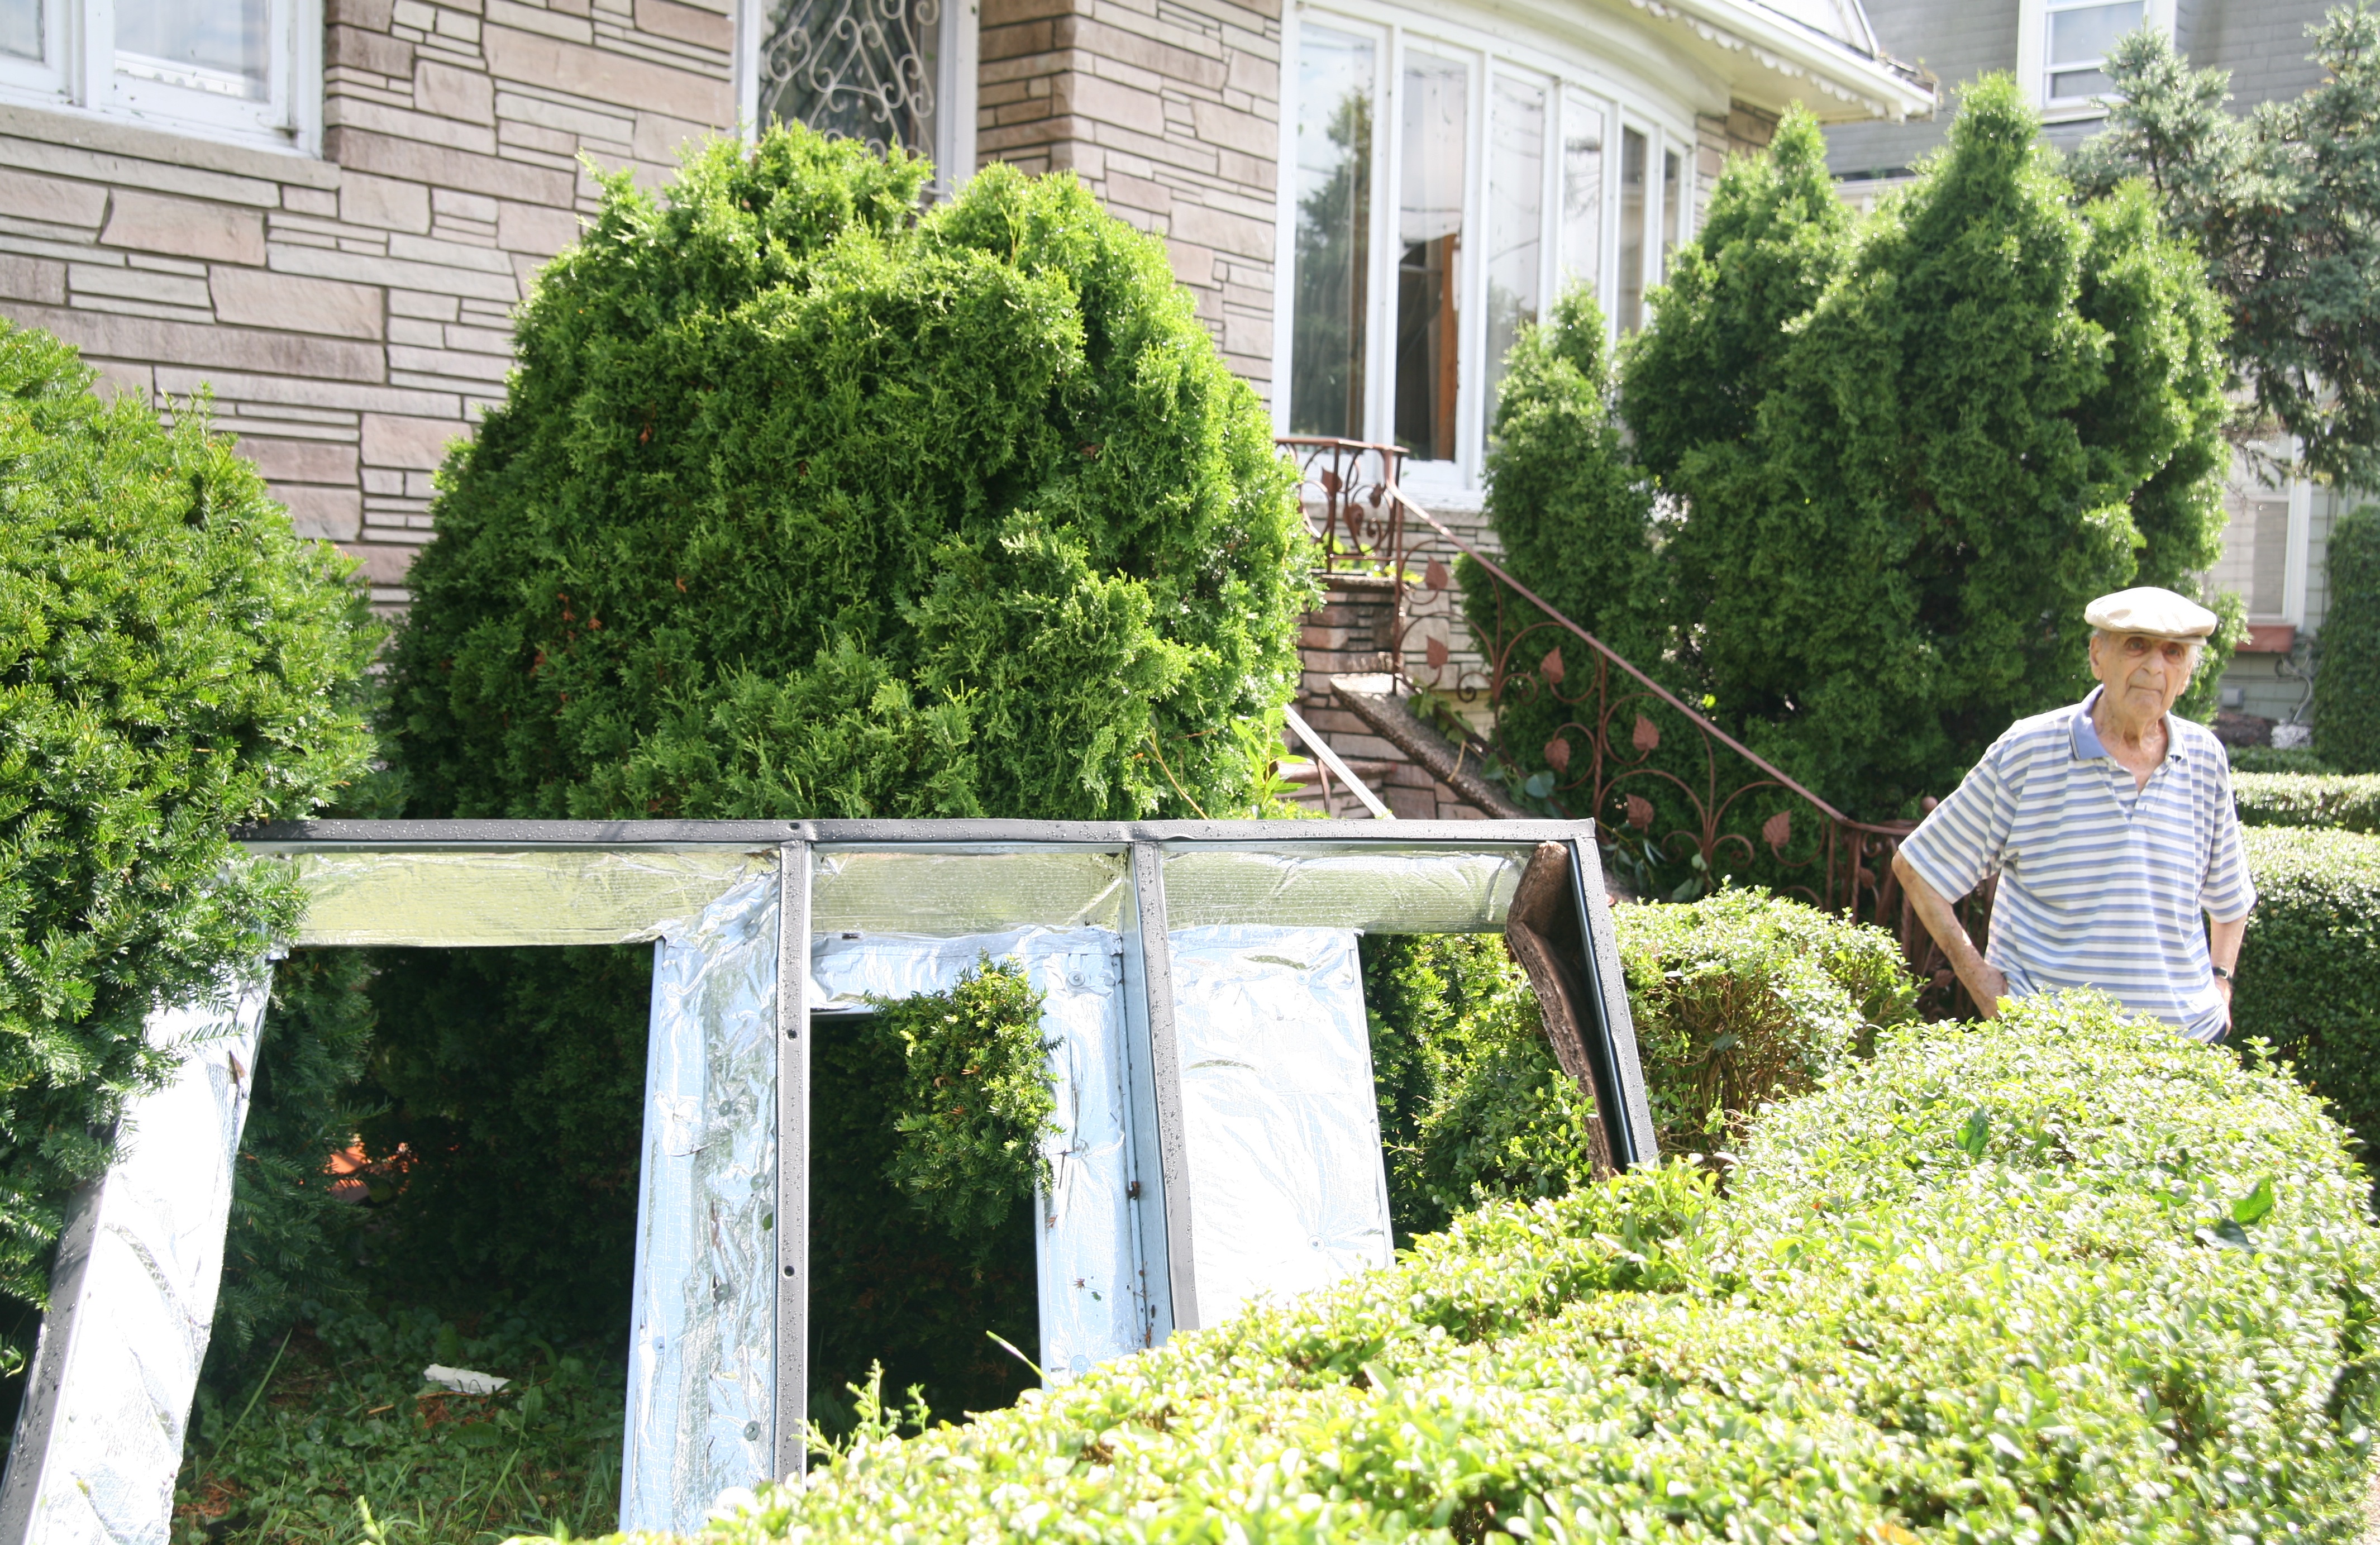 Frank Bellofatto of Mountain Avenue came out of his home to find the top of the Rite Aid sign in his front yard.